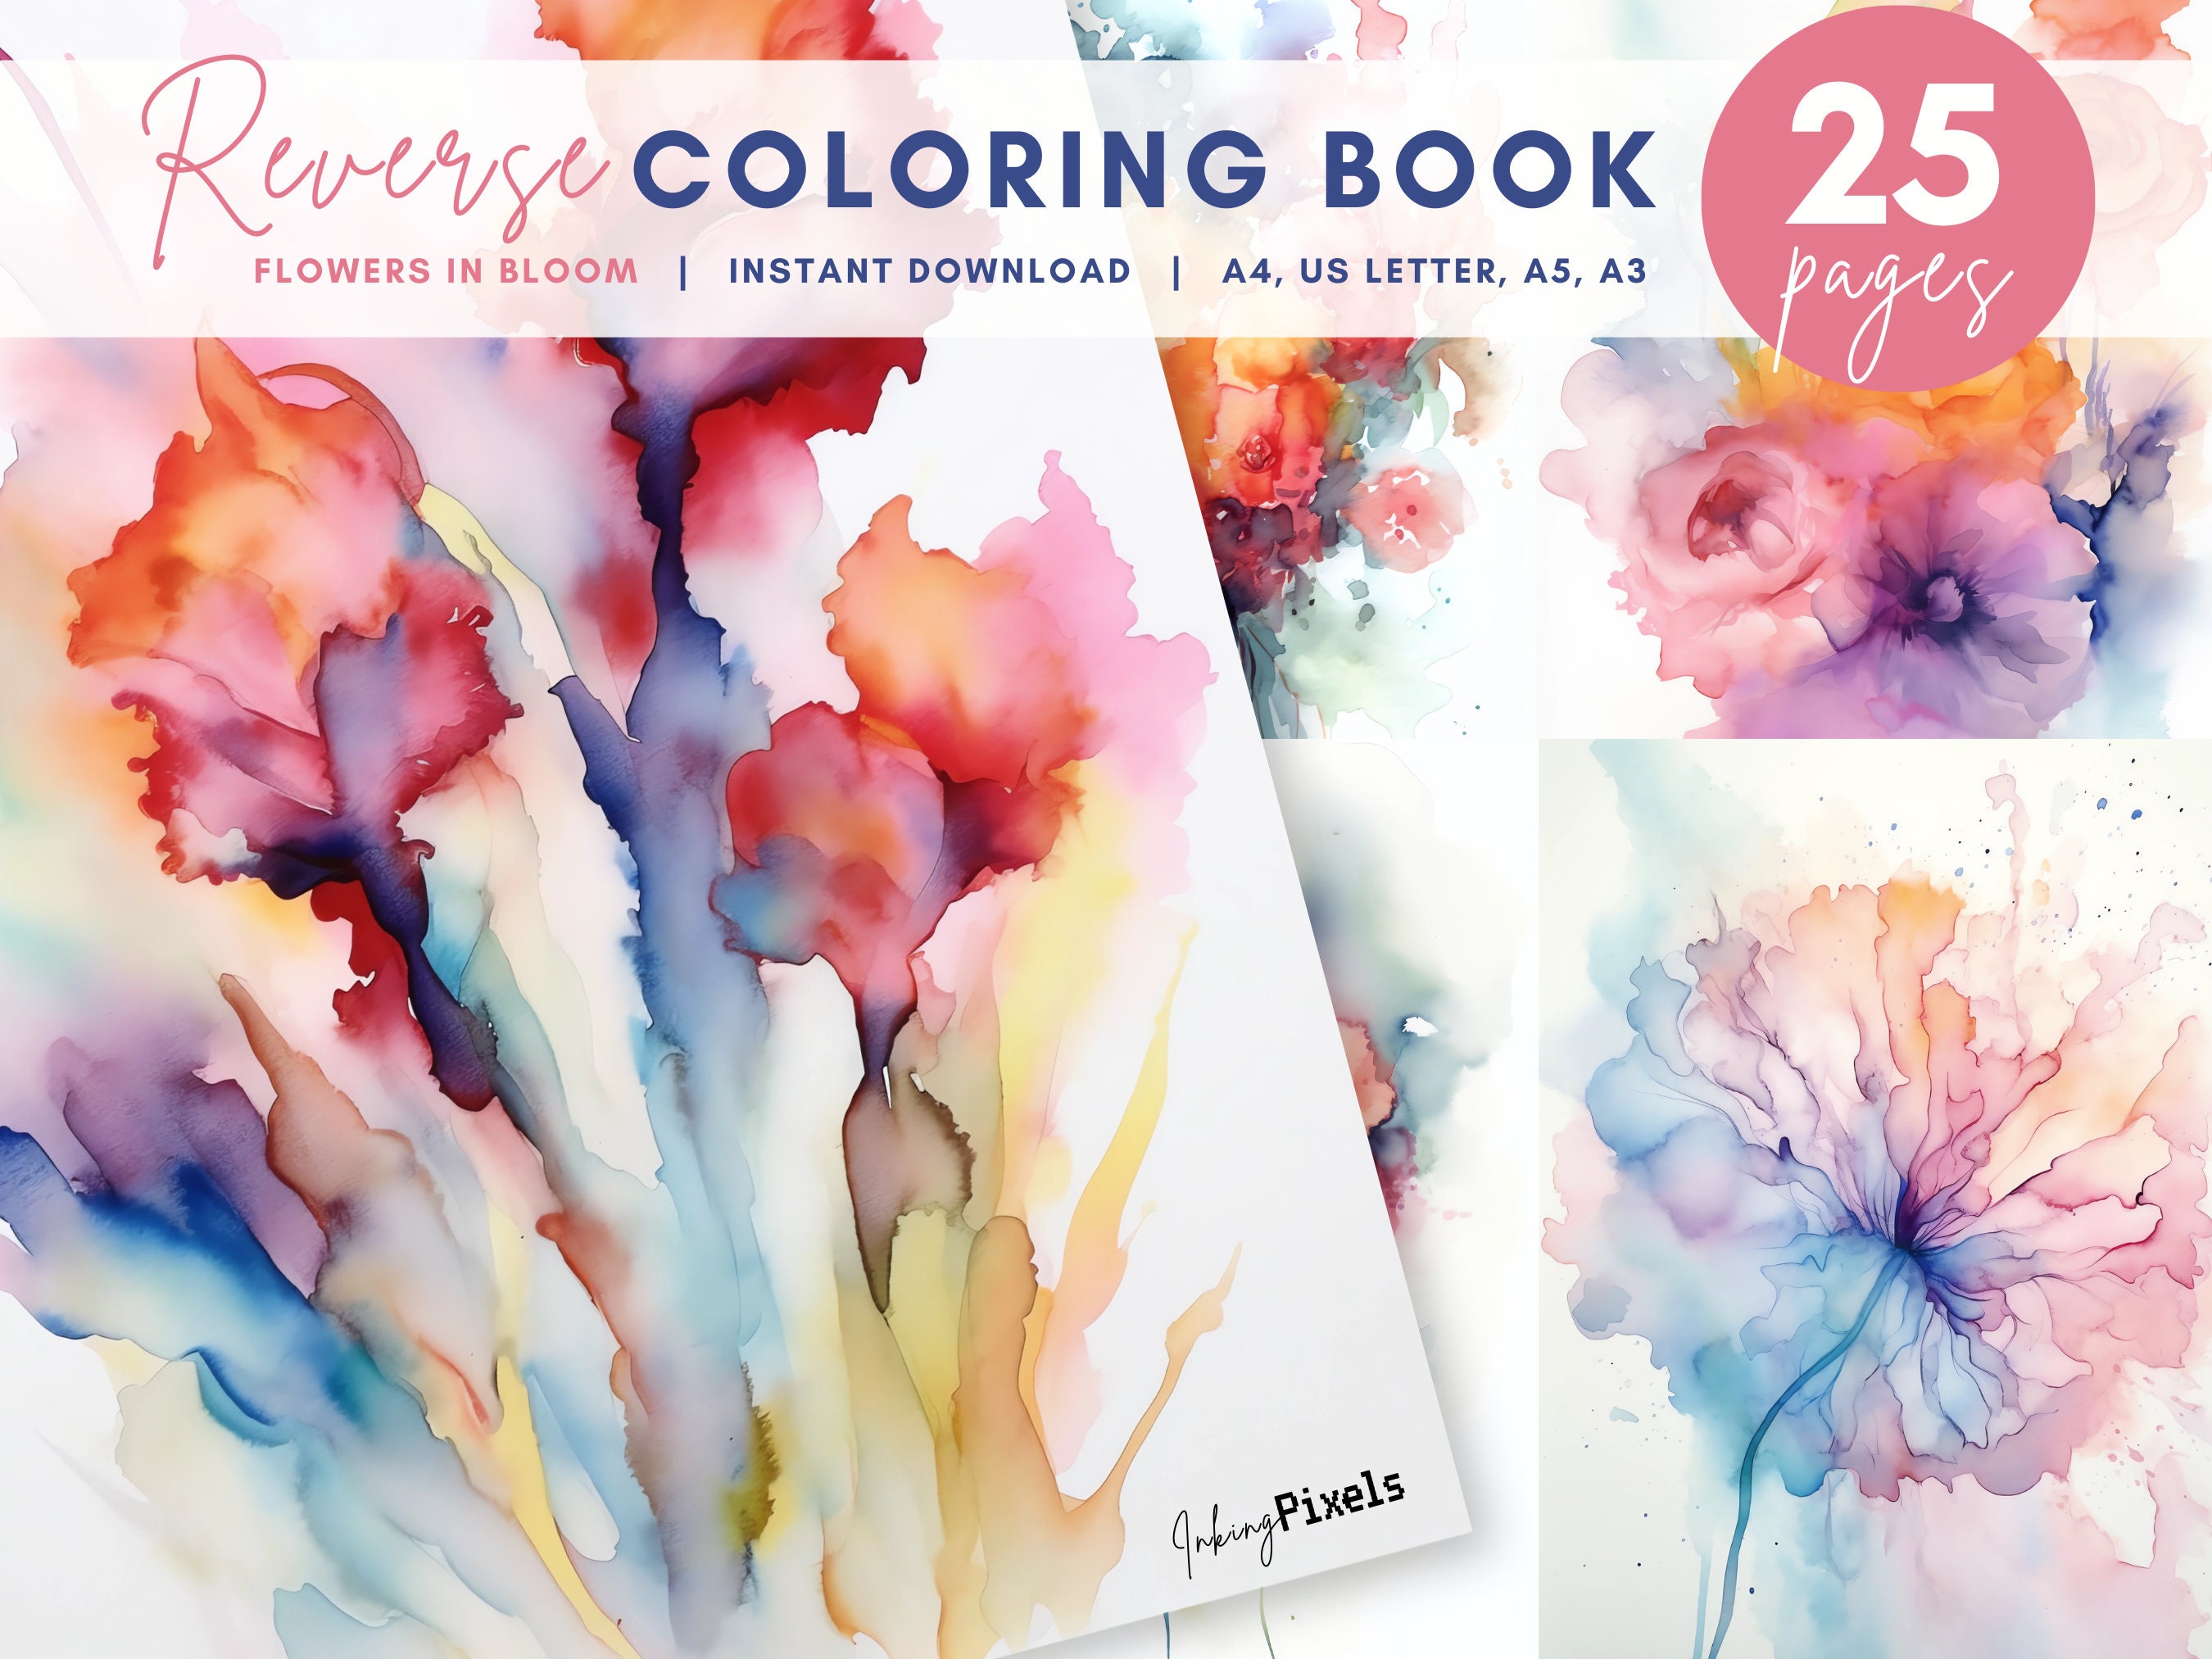 Simple Reverse Coloring Book for adults: You Draw the Lines. 32 pages of  inverse coloring, flowers, Imagination, relaxation and stress relief